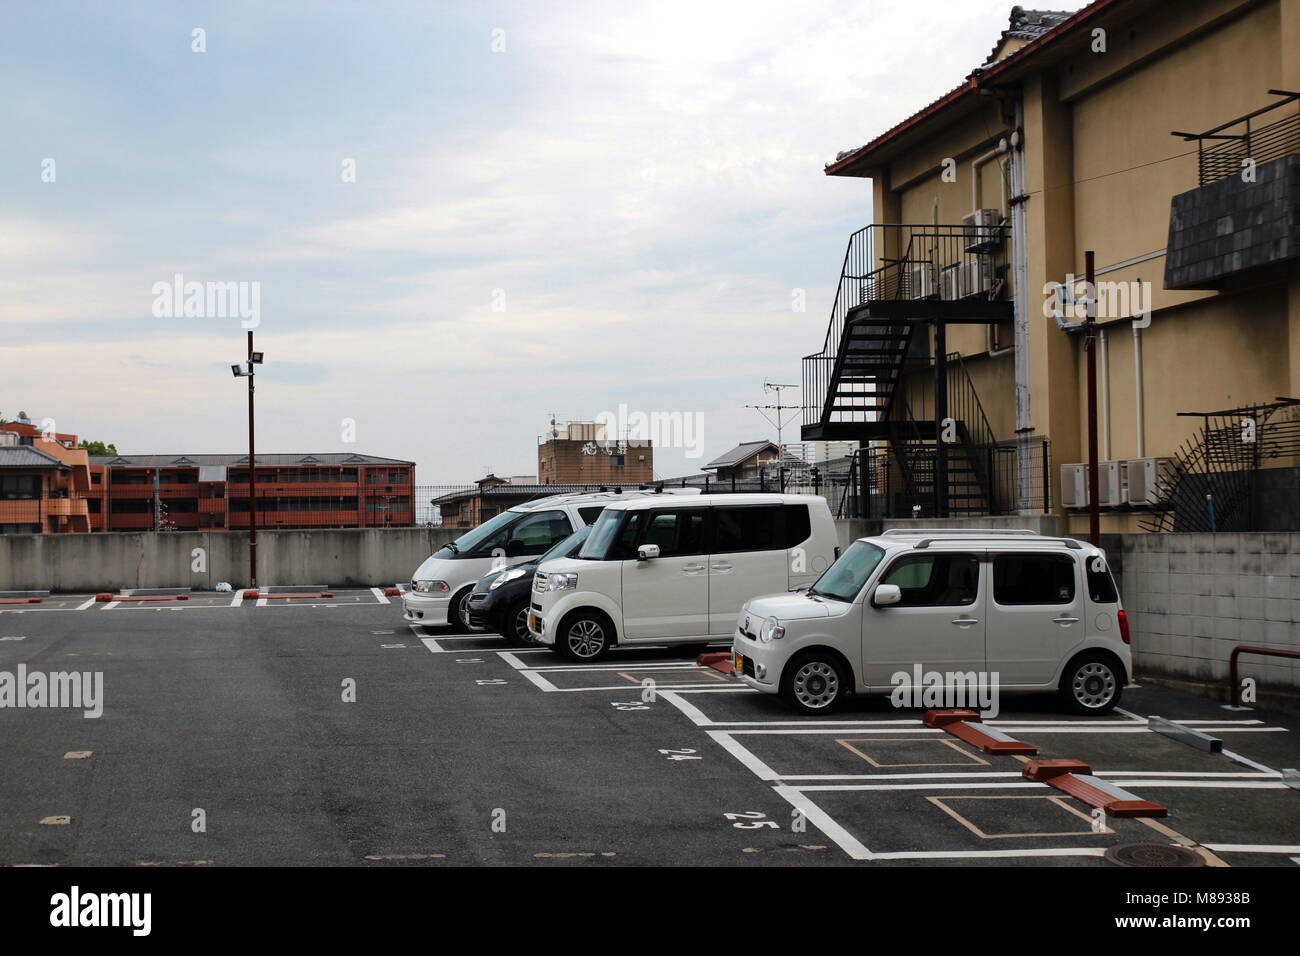 Undefined car parking at the outdoor public carpark in Kyoto, Japan Stock Photo